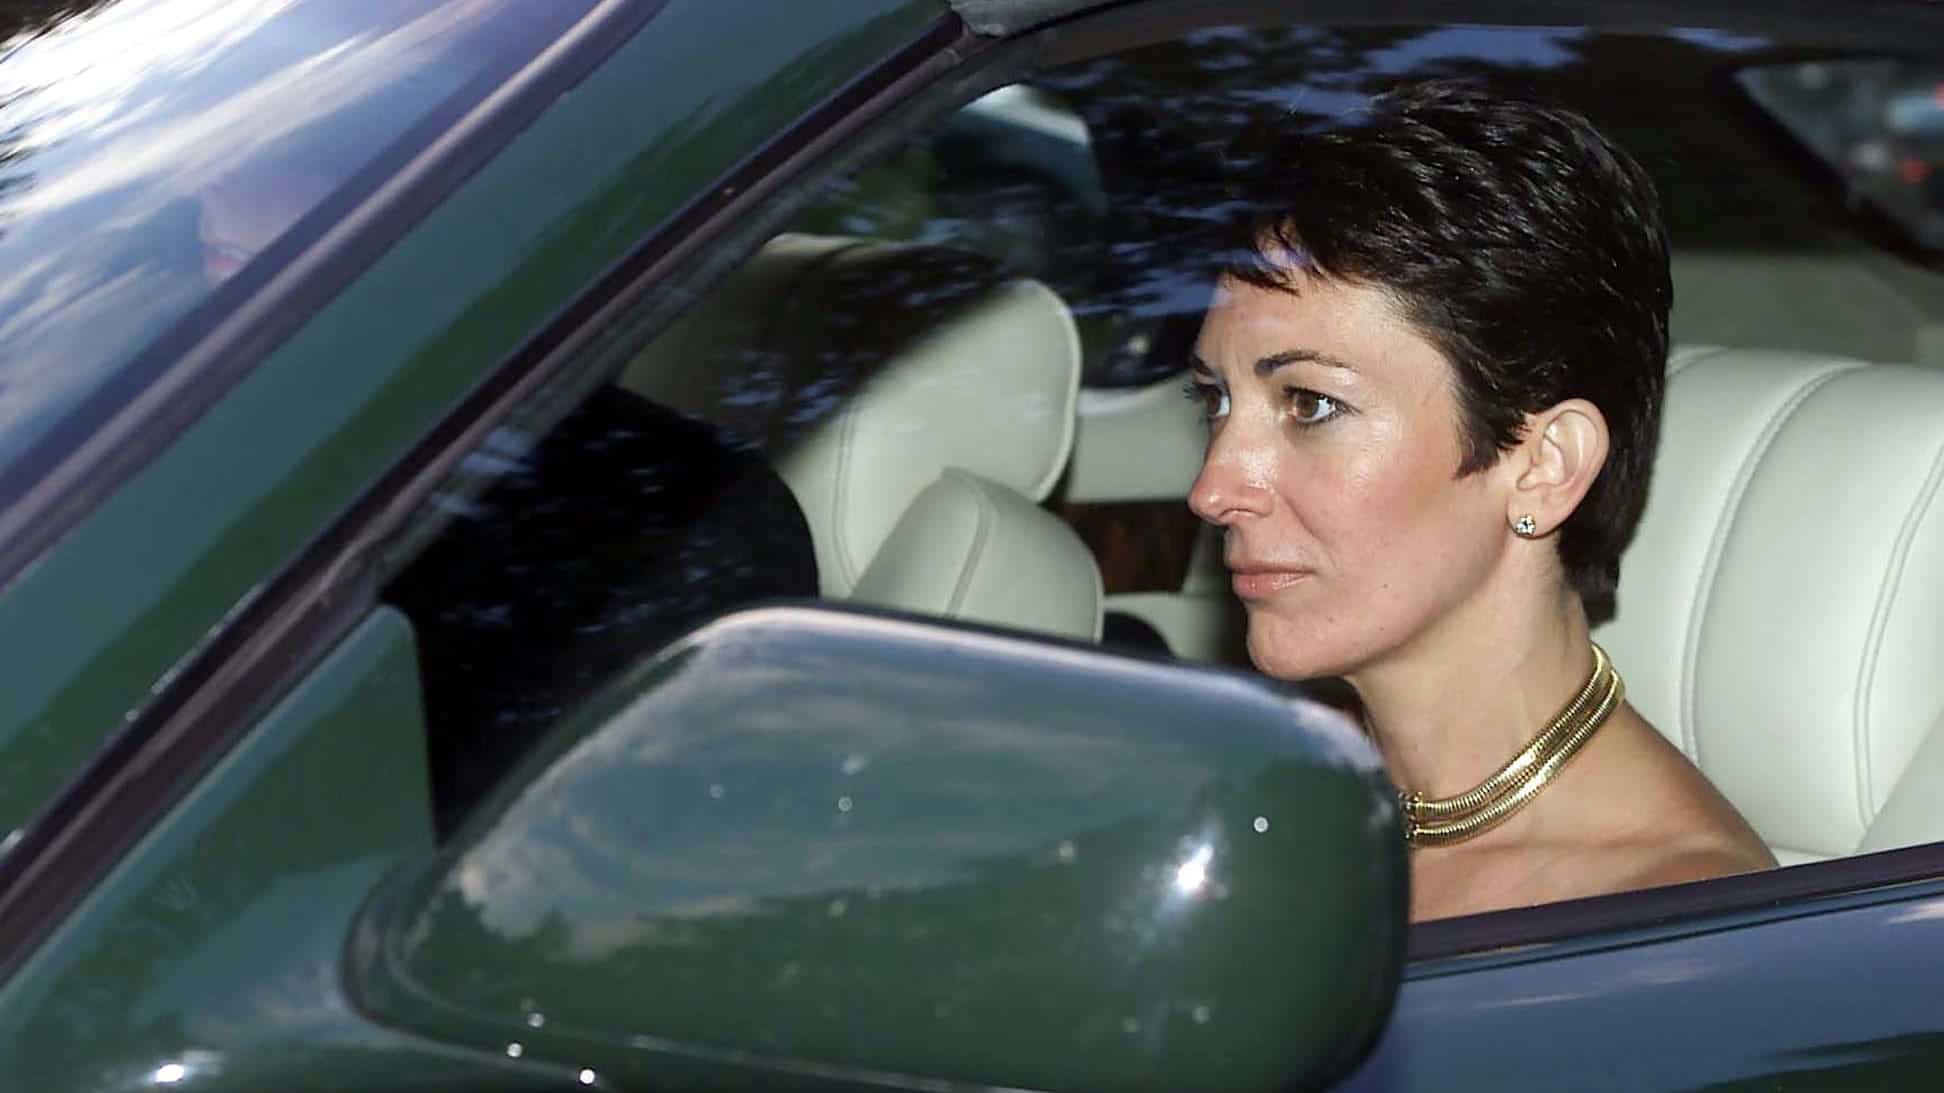 Ghislaine Maxwell arrested in New Hampshire on Epstein-related charges